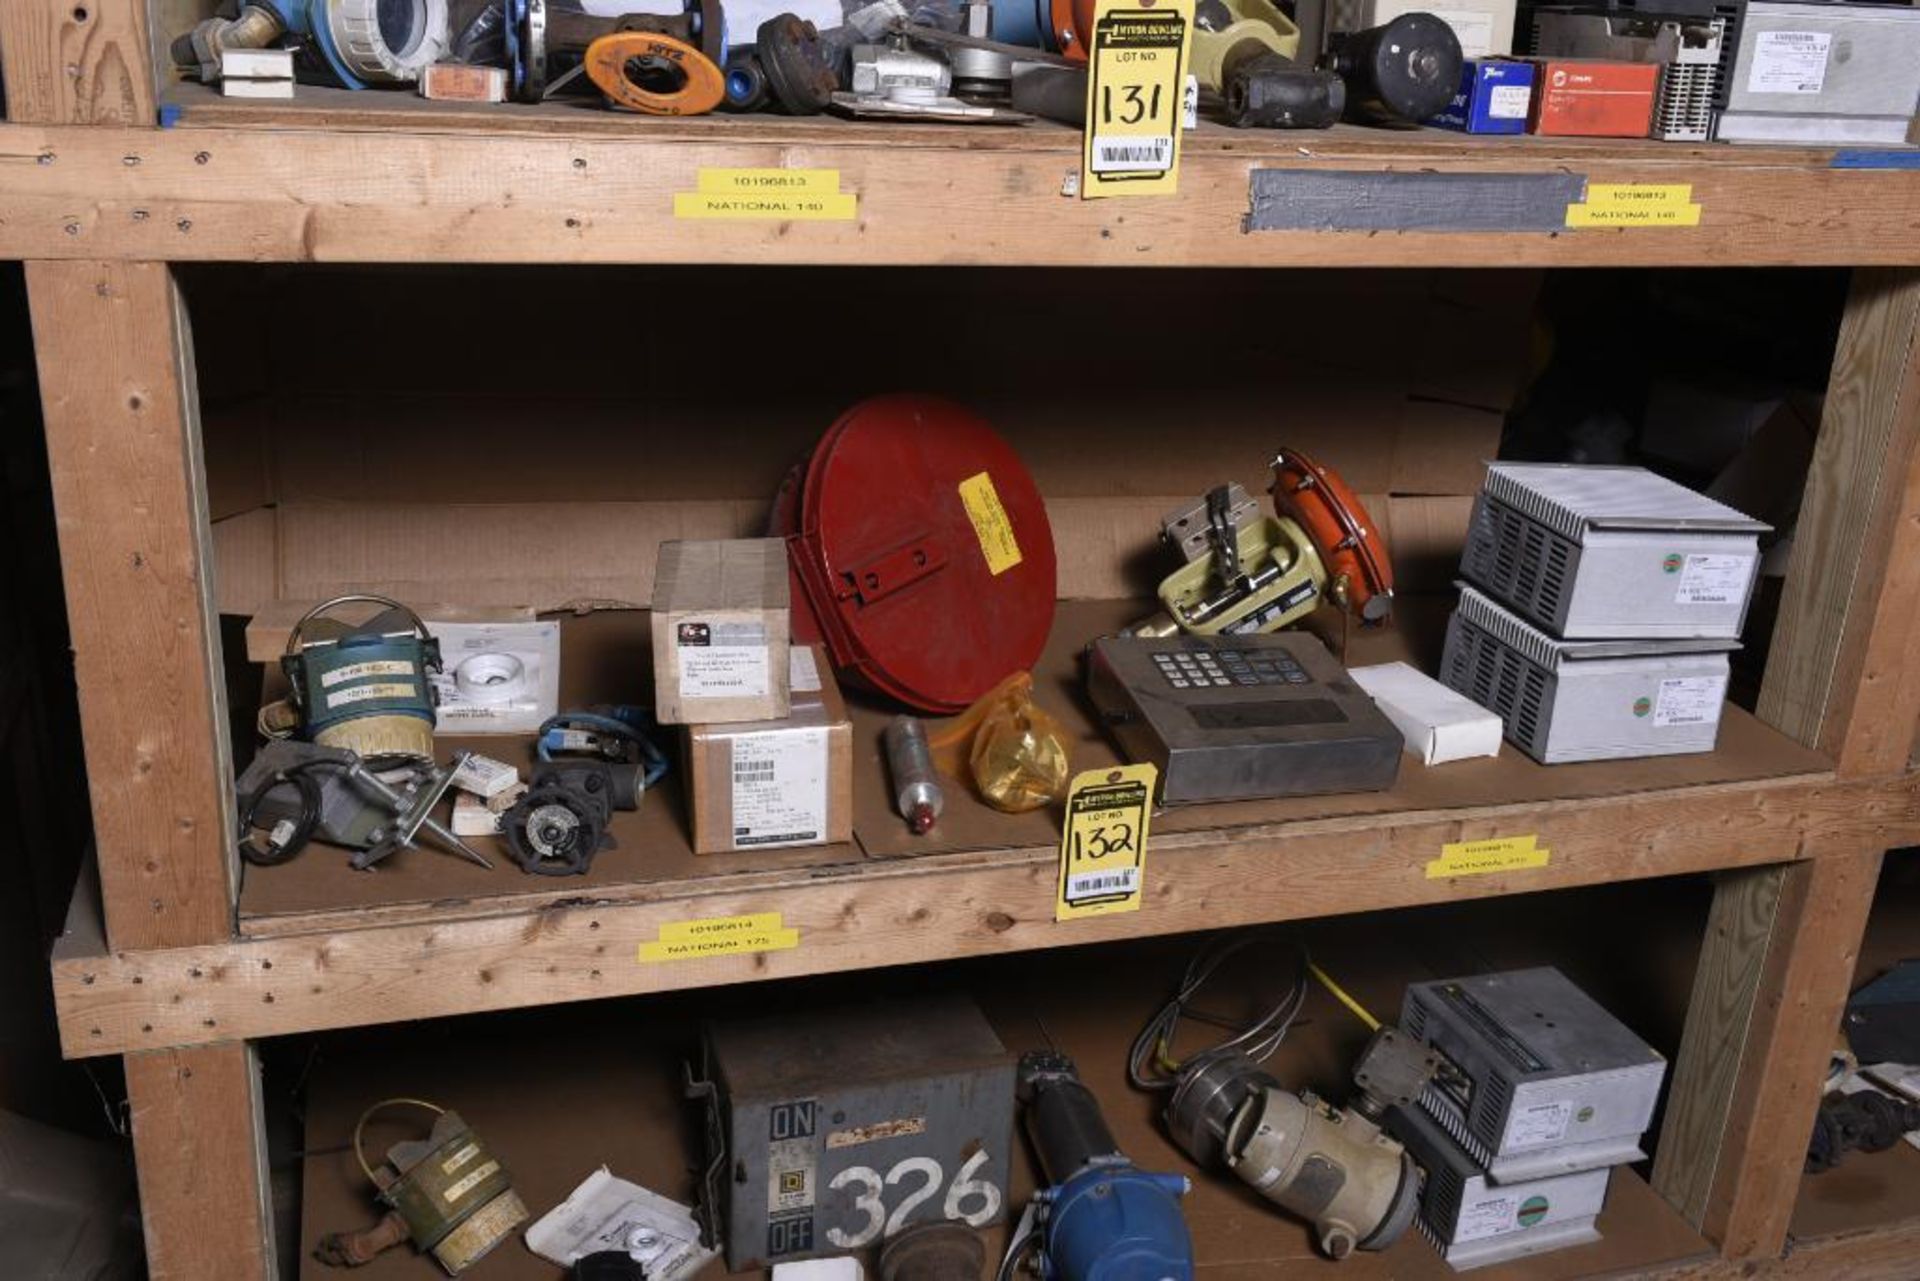 Shelf of Miscellaneous MRO; Valves & Electrical (Cutler Hammer, Endress Hauser, Reliance Electric)